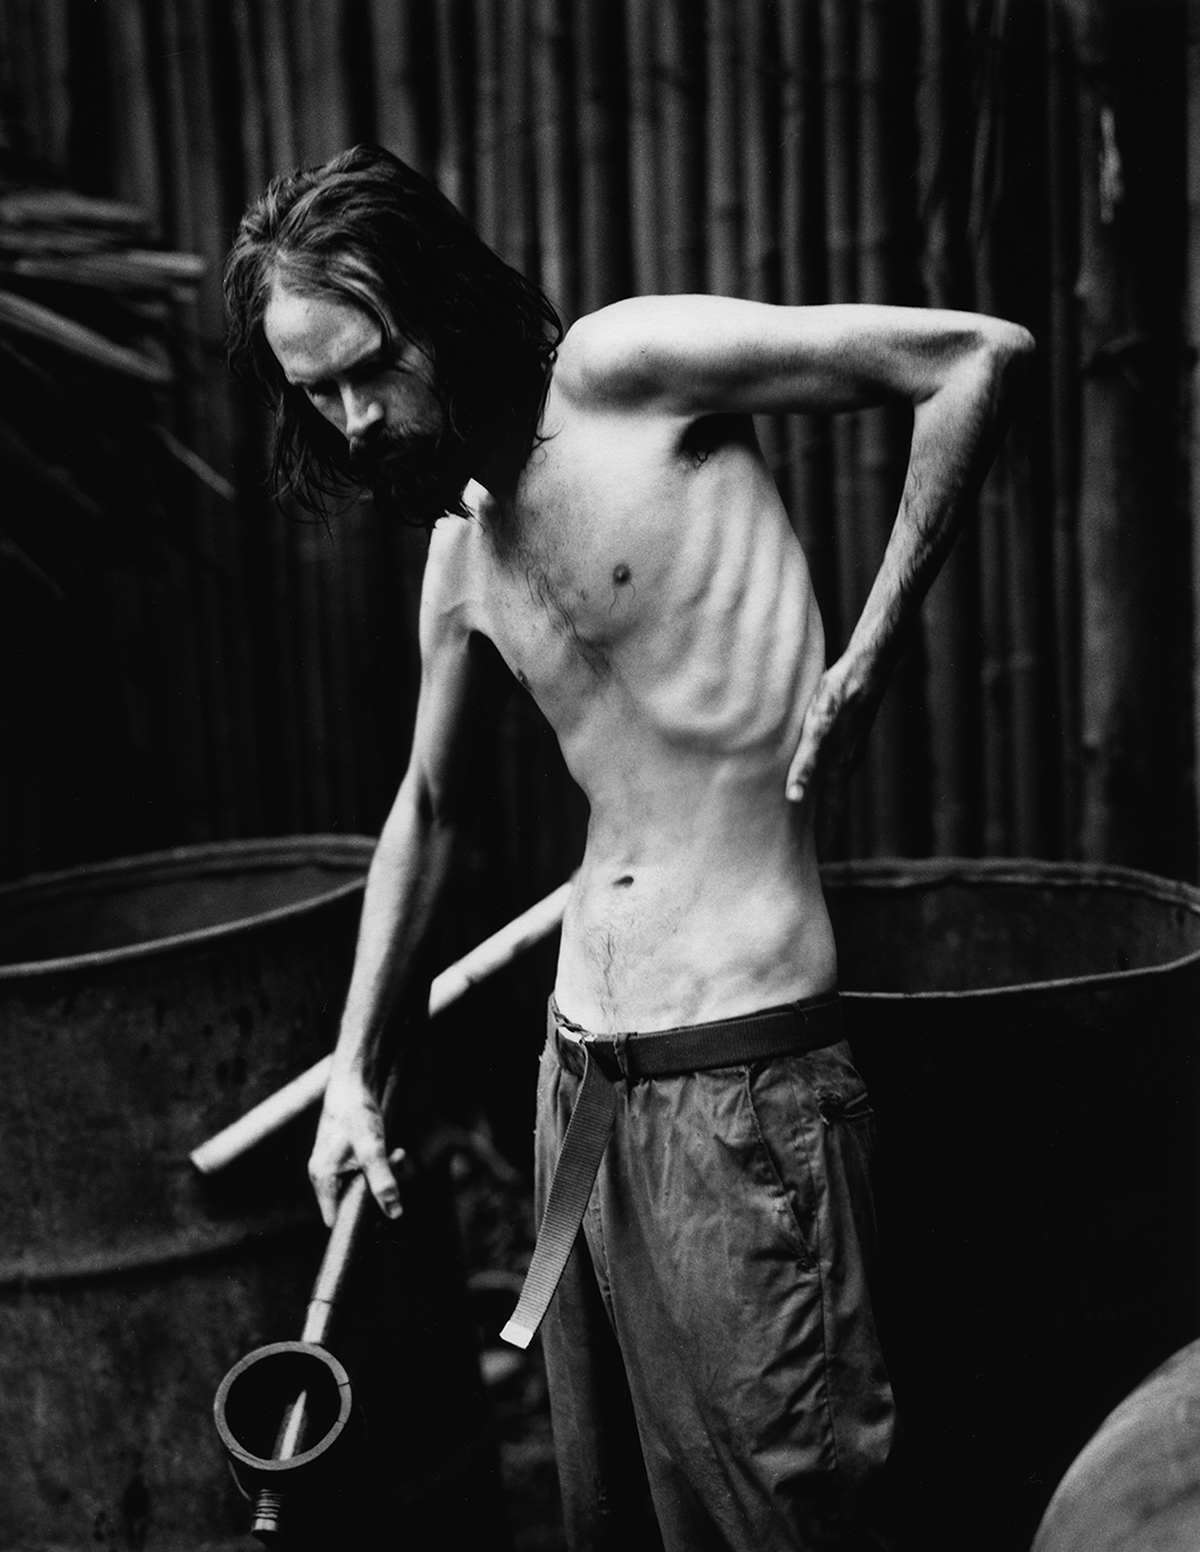 Black and white photo: An extremely thin, emaciated young man with his upper body exposed. His ribs are clearly visible.